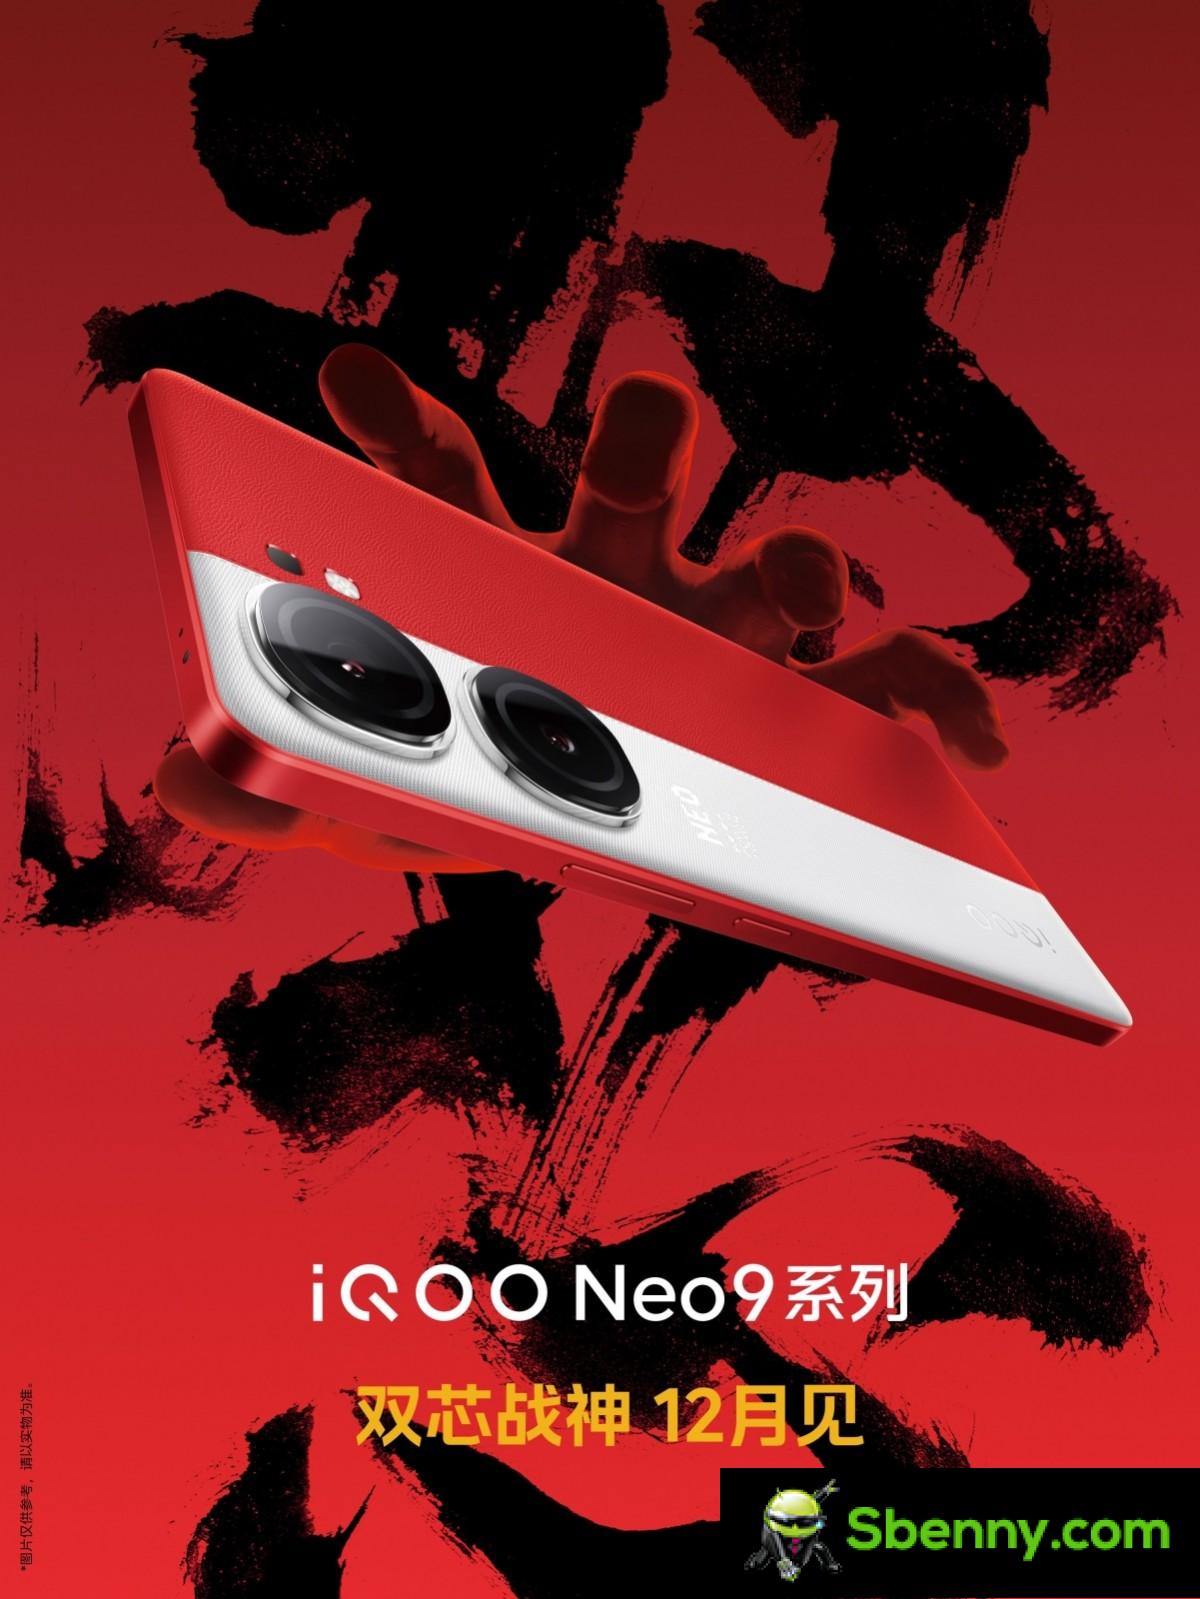 iQOO Neo9 will arrive in December with a two-tone design